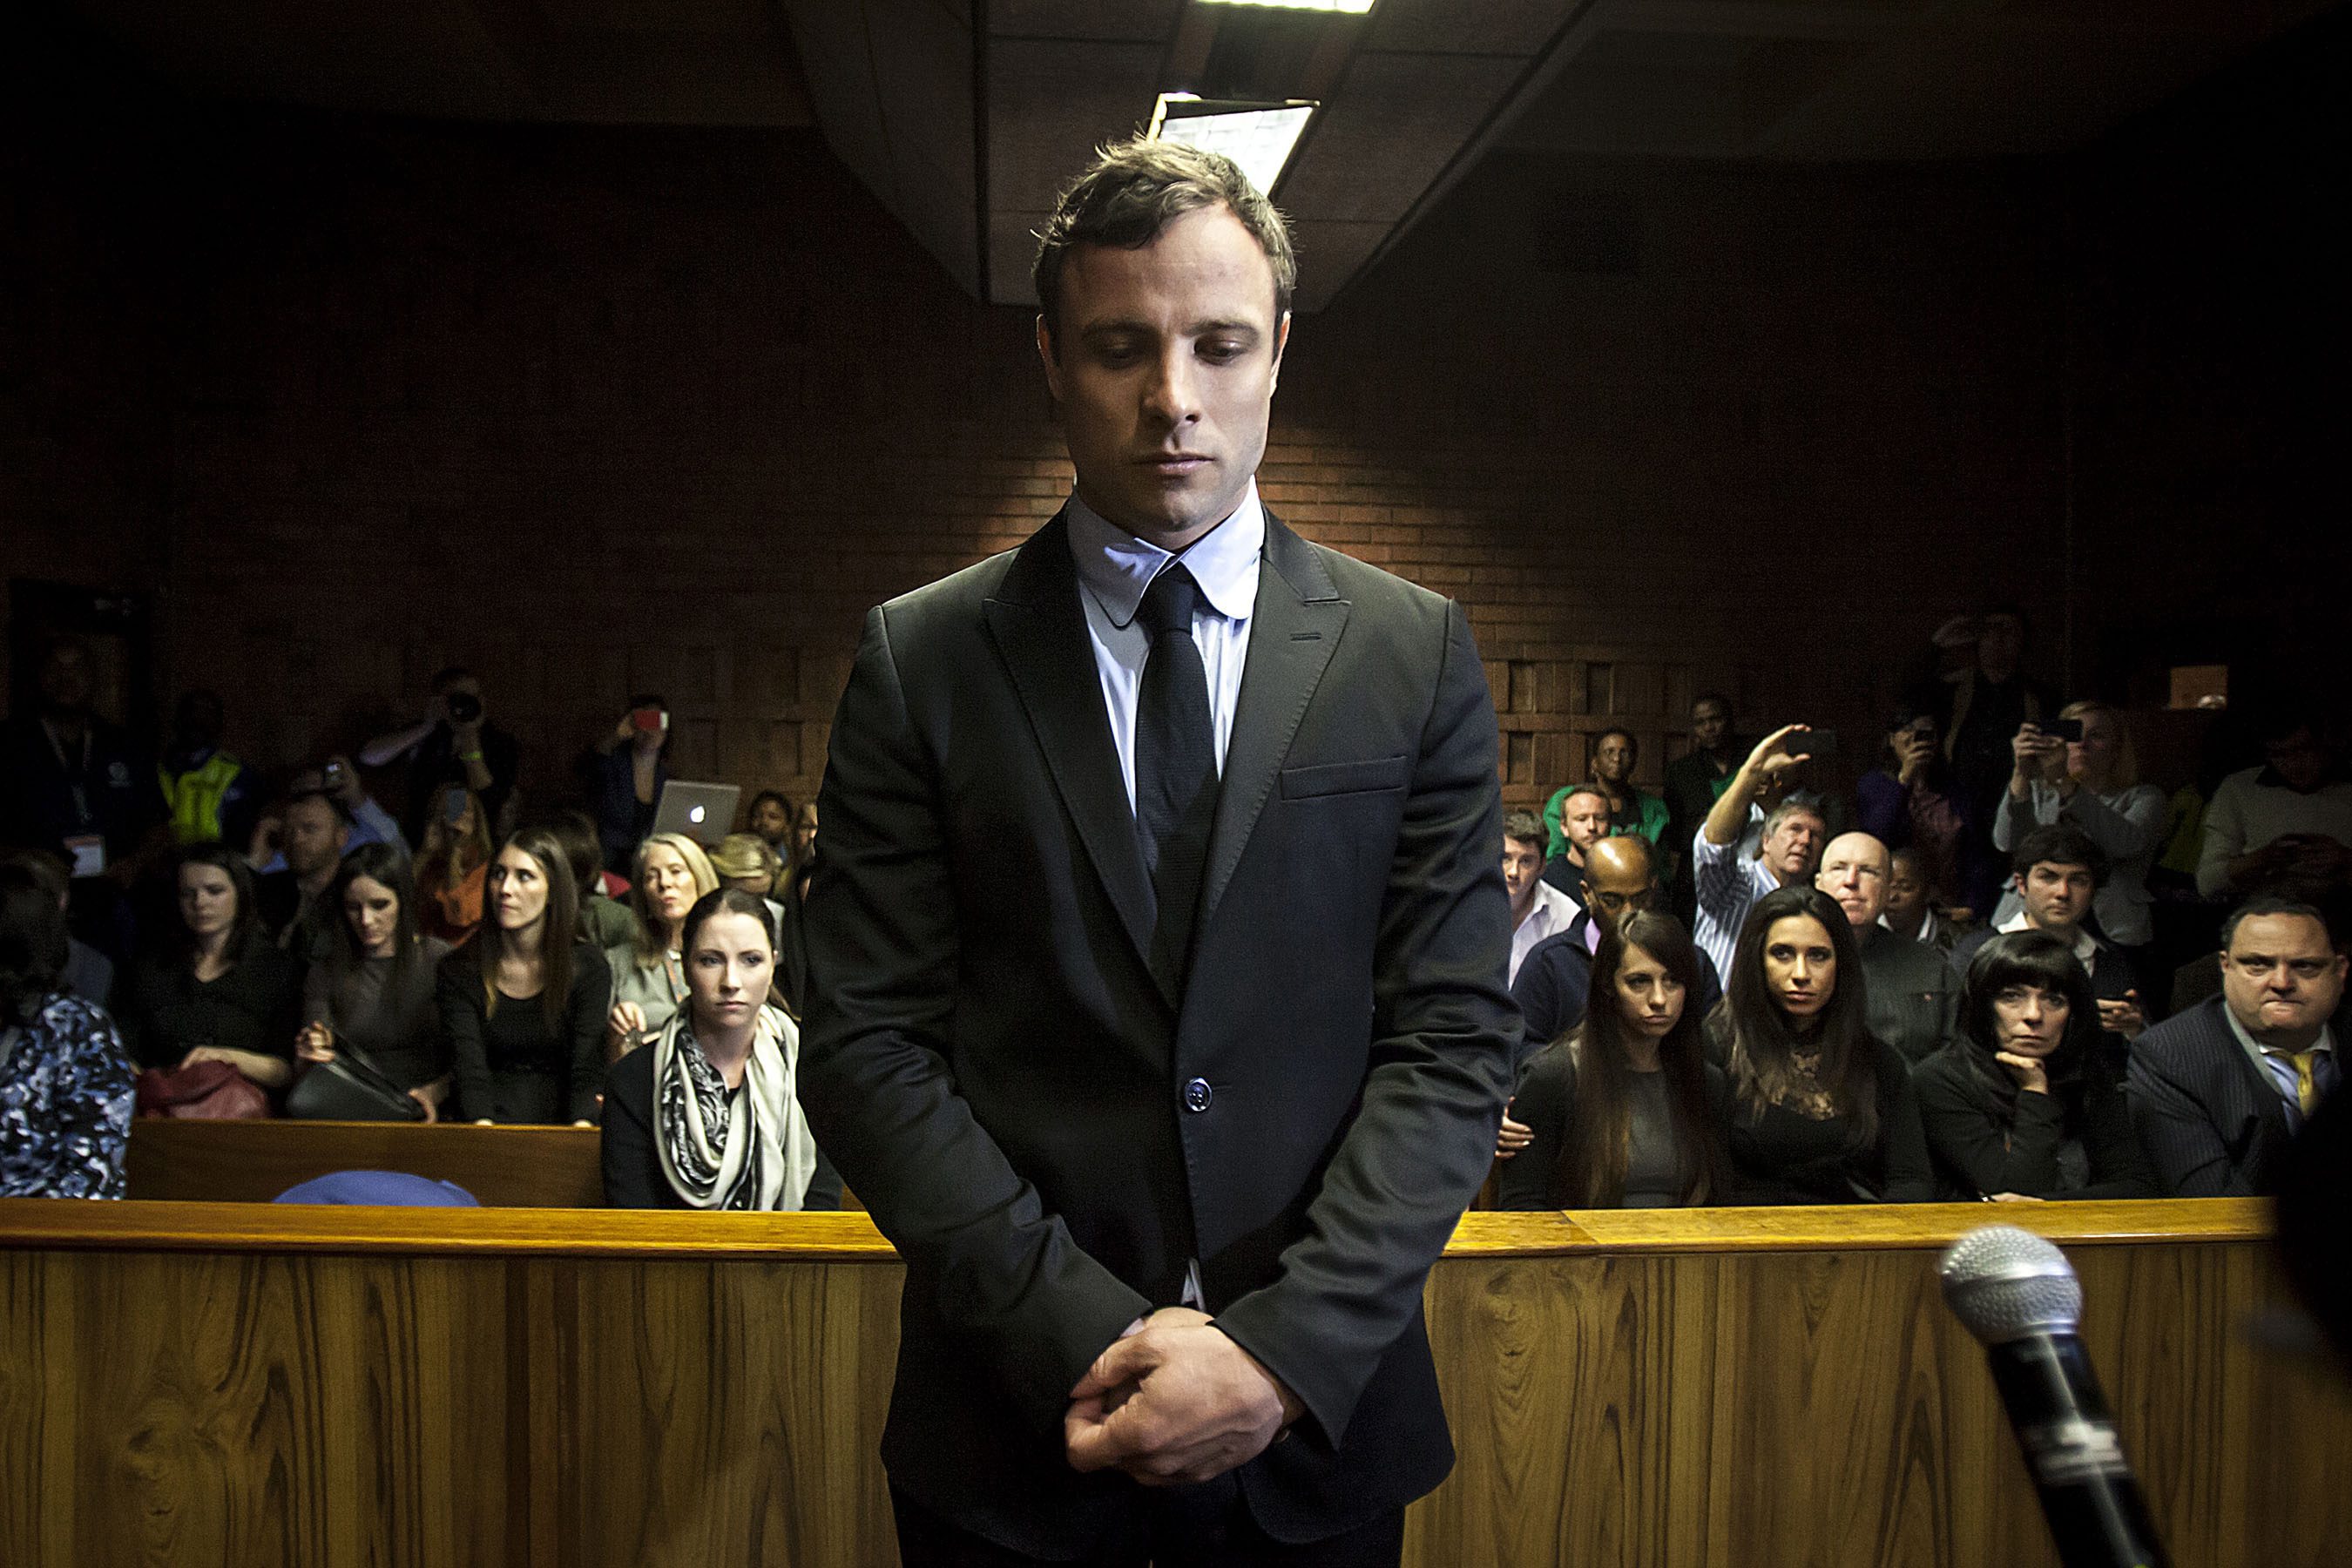 epa05052664 (FILE) A file picture dated 19 August 2013 shows South African Paralympic athlete Oscar Pistorius as he appears in the Pretoria Magistrates court in Pretoria, South Africa. Oscar Pistorius will have to return to prison after South Africa's Supreme Court of Appeals found him guilty on 03 December 2015 of murdering his girlfriend in 2013. The decision sets aside a 2014 verdict by a Pretoria court that found Pistorius guilty of culpable homicide. EPA/STR *** Local Caption *** 52313304